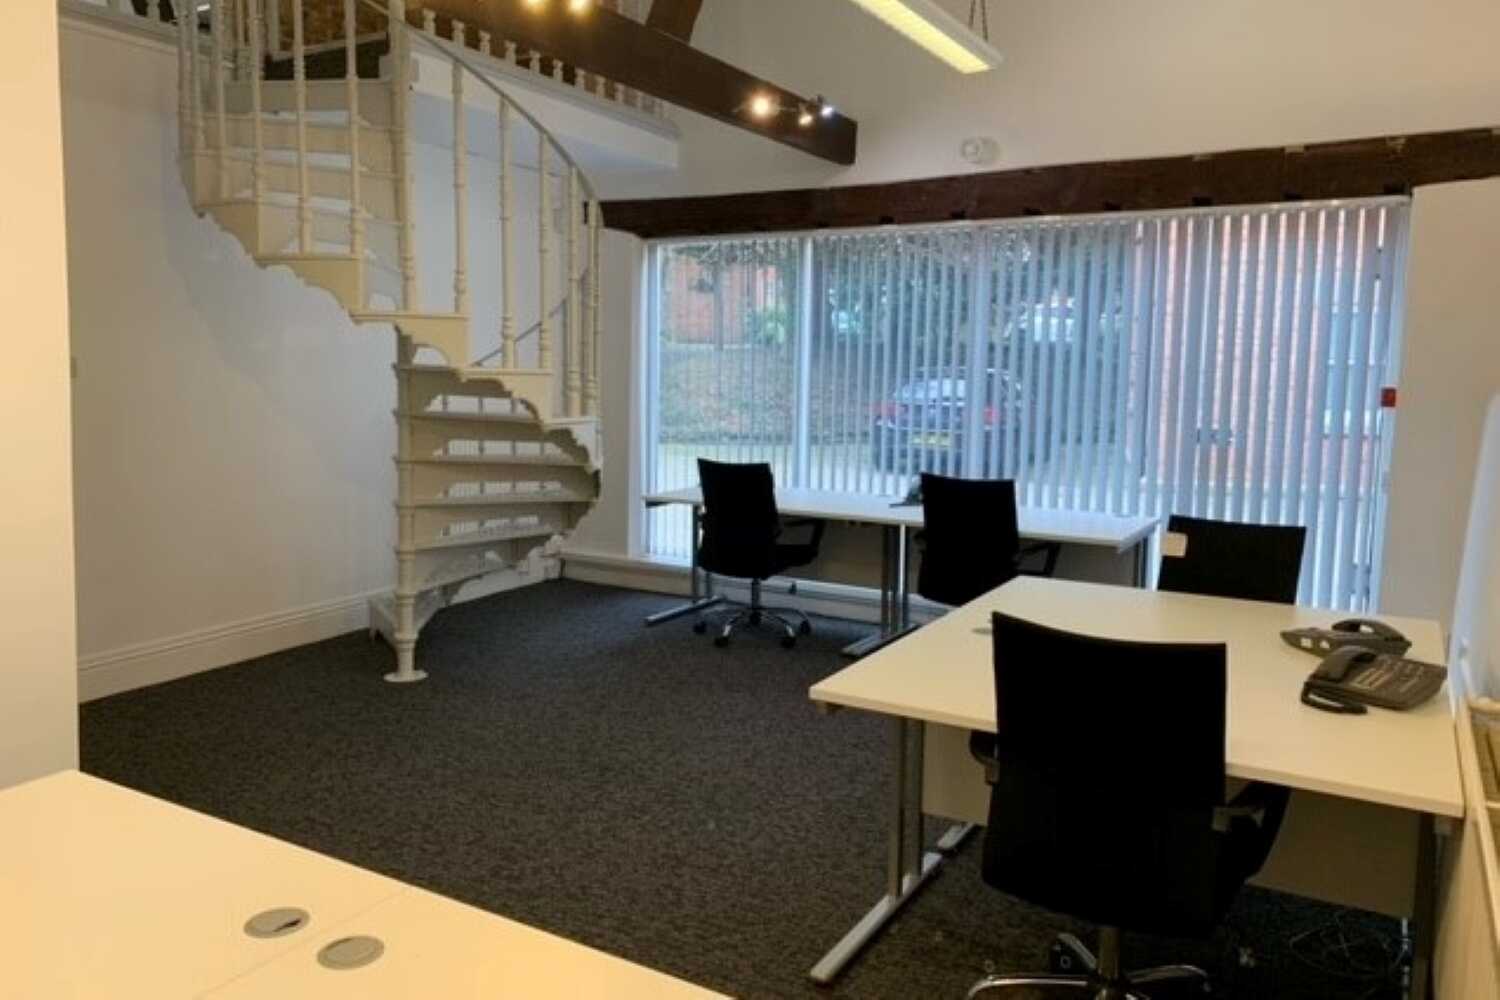 Serviced offices in Castle Donington, Derbyshire